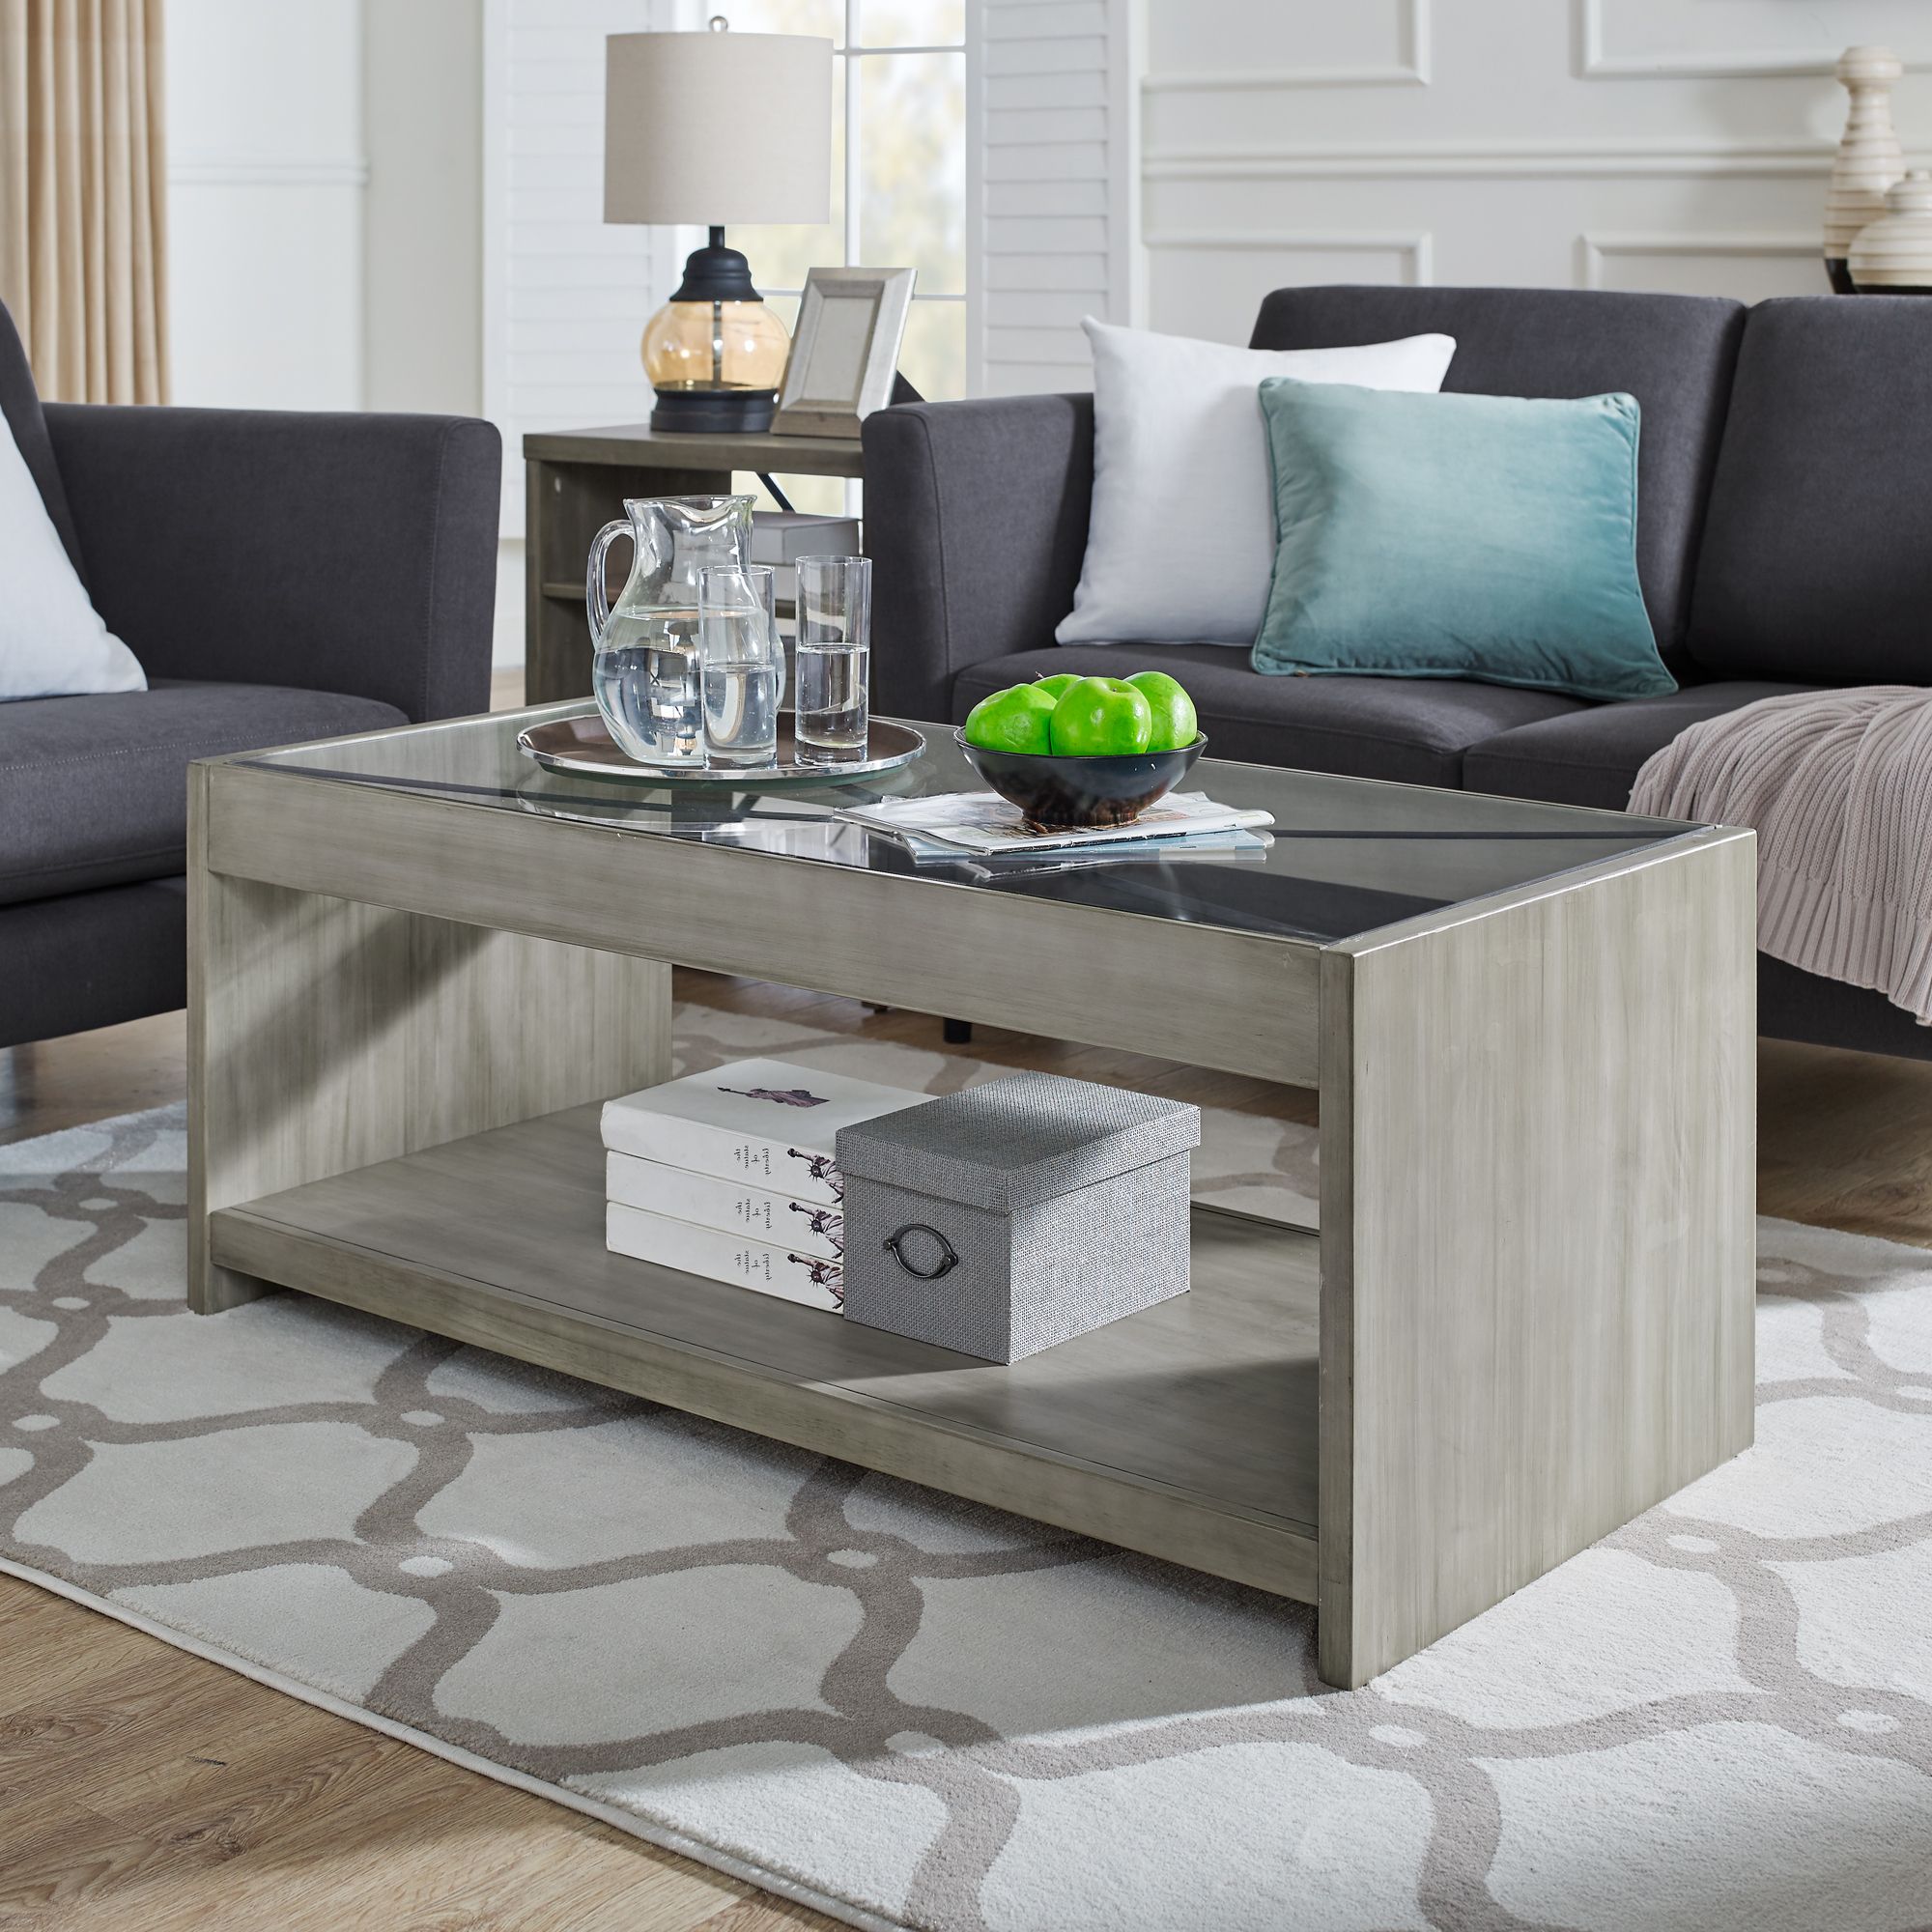 Modern Essentials Georgette Rustic Farm House Solid Wood Within Popular Geometric Glass Modern Coffee Tables (Gallery 7 of 20)